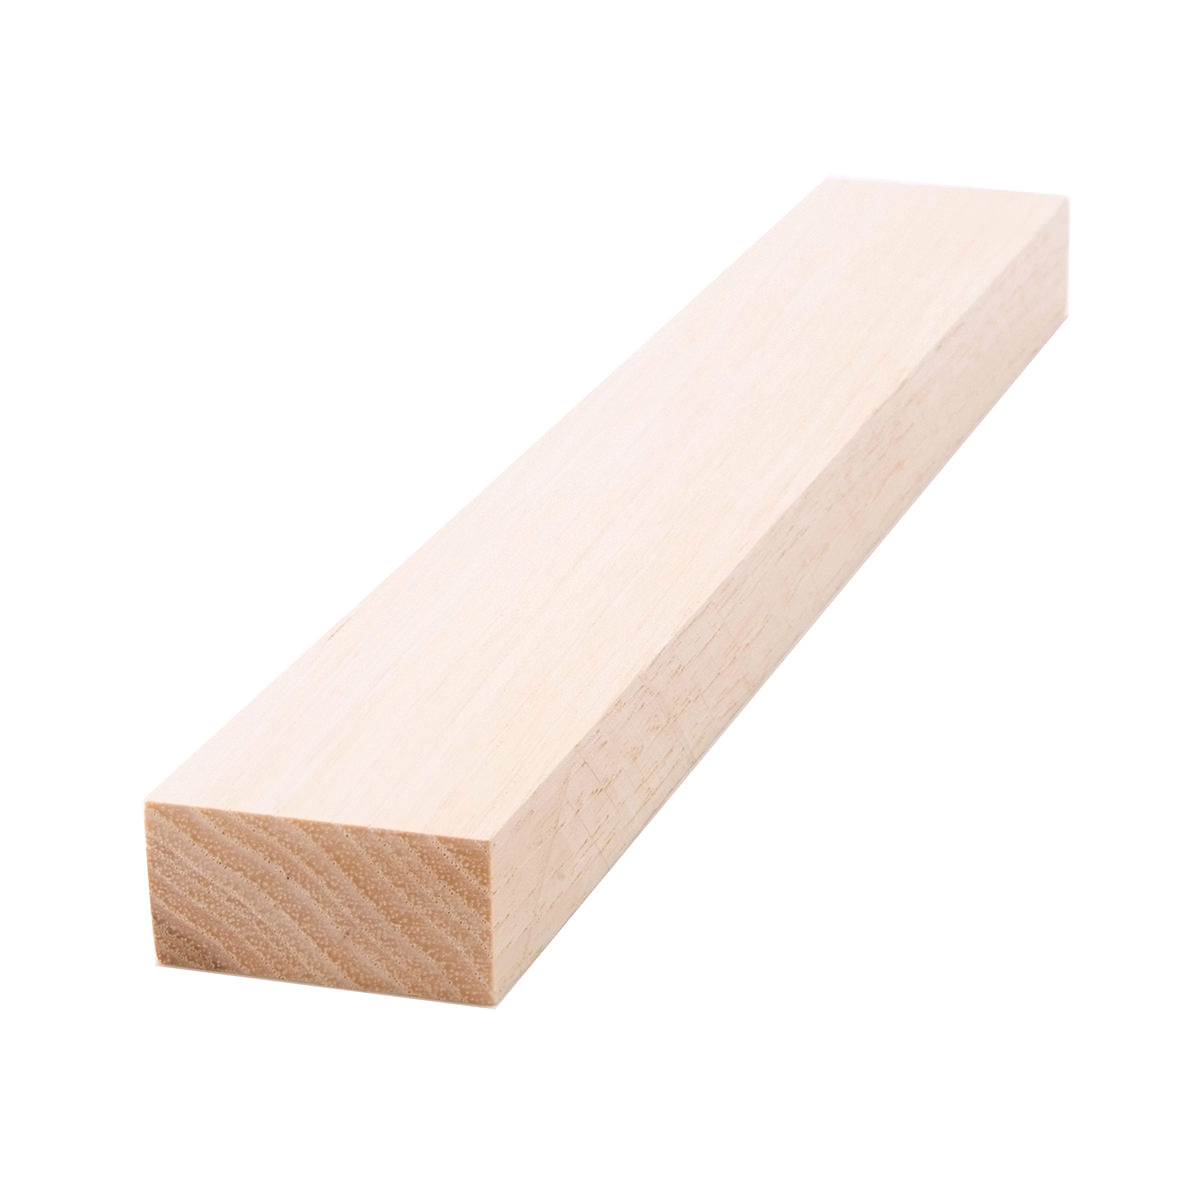 1x2 (3/4" x 11/2") Hickory S4S Lumber, Boards, & Flat